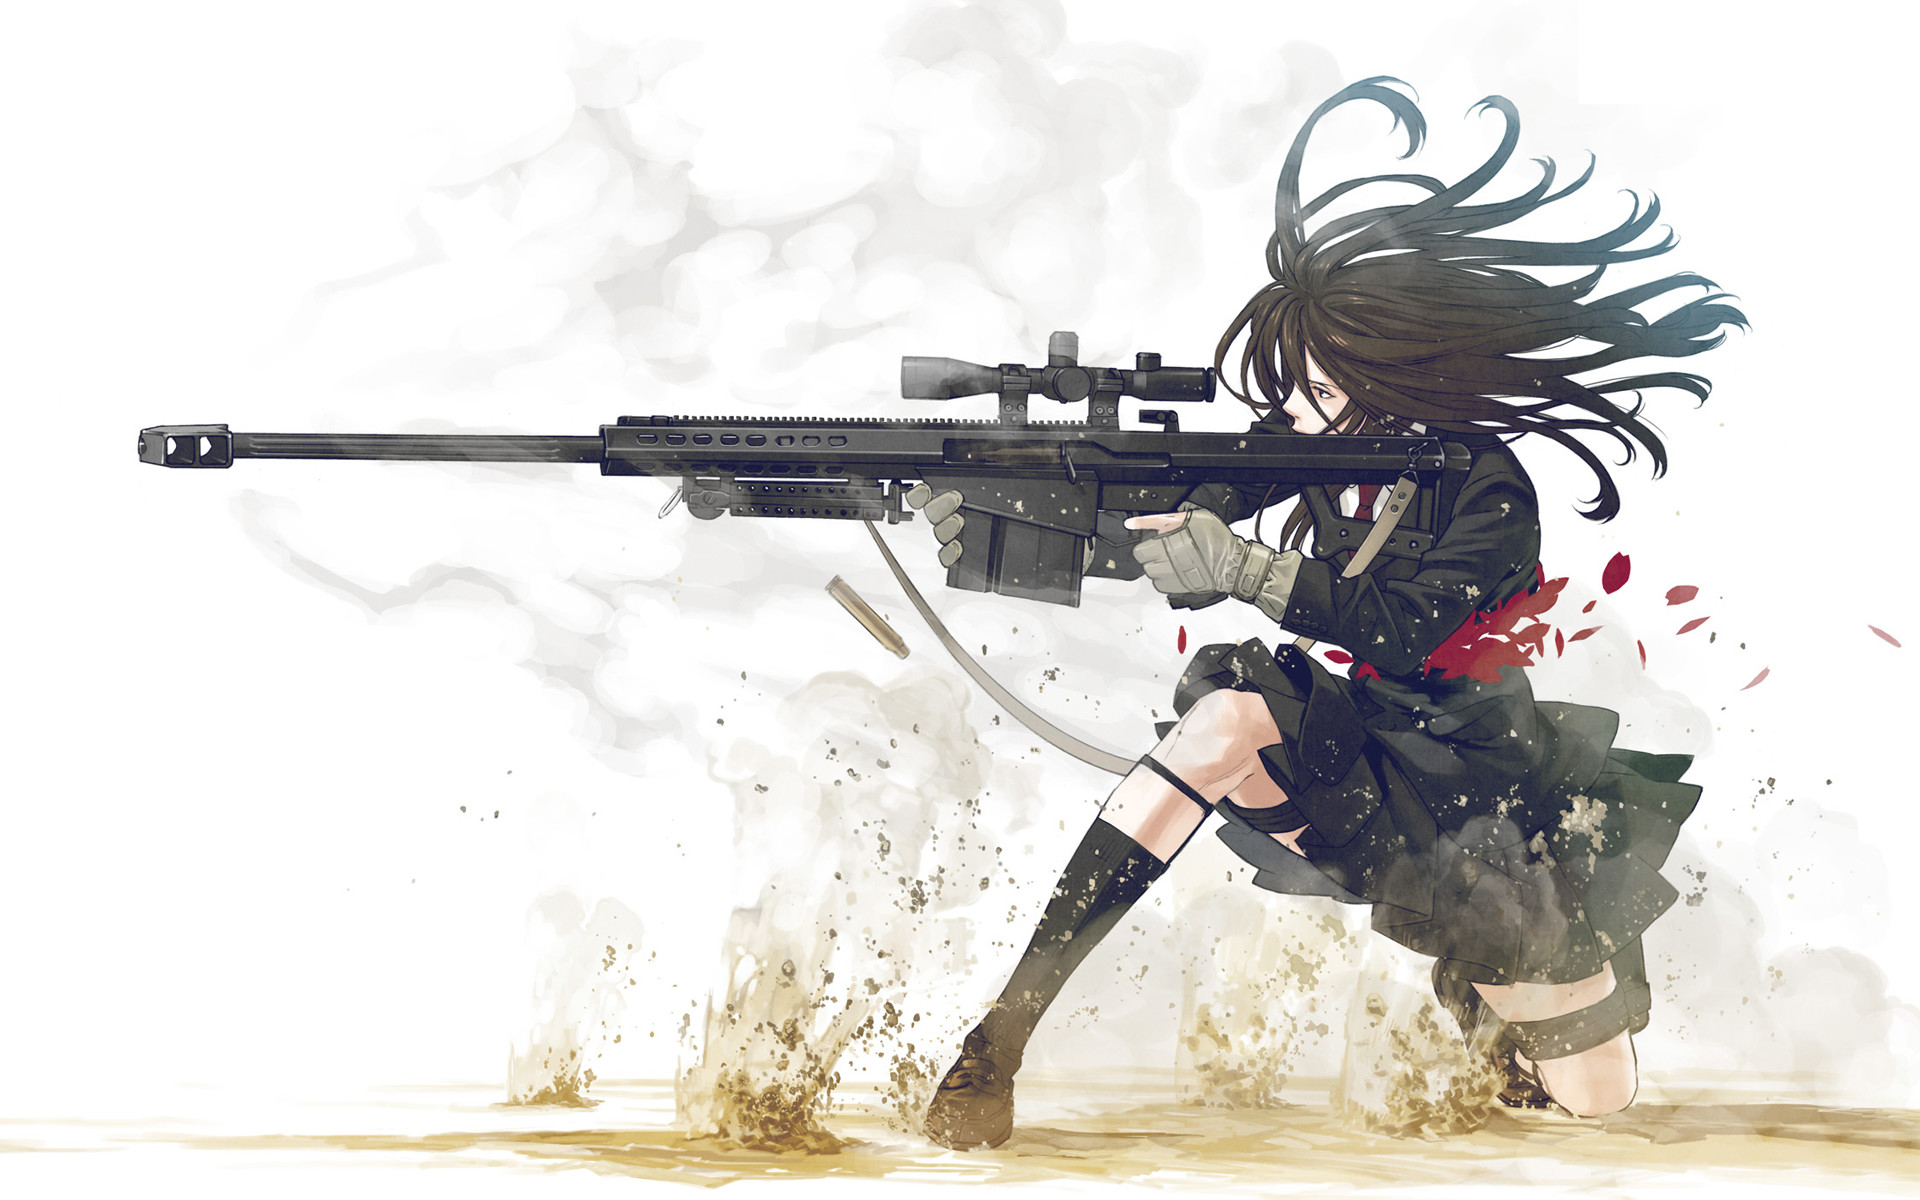 1920x1200 ... with a sniper rifle HD Wallpaper 